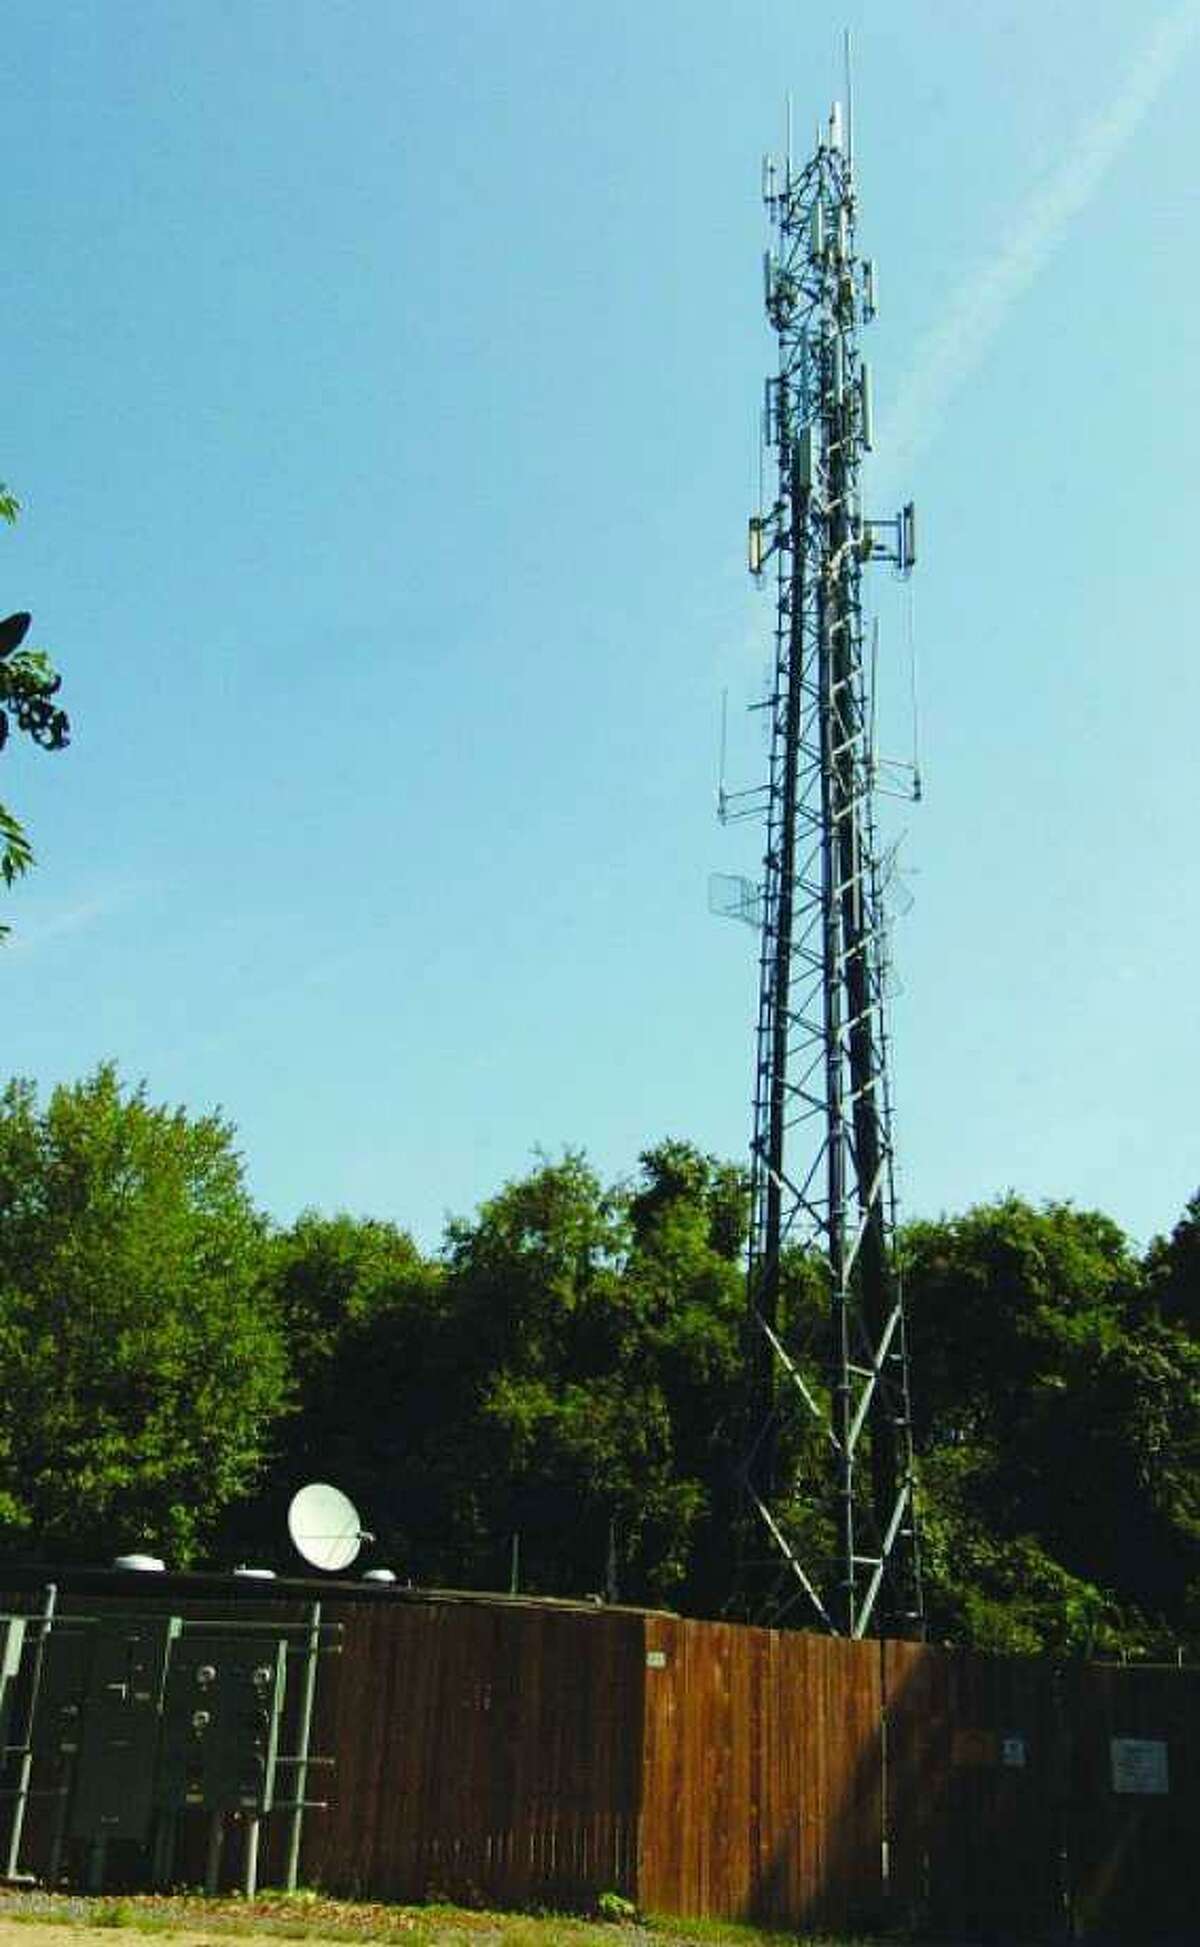 One of the town’s cell towers off of Deer Run Road in Wilton.